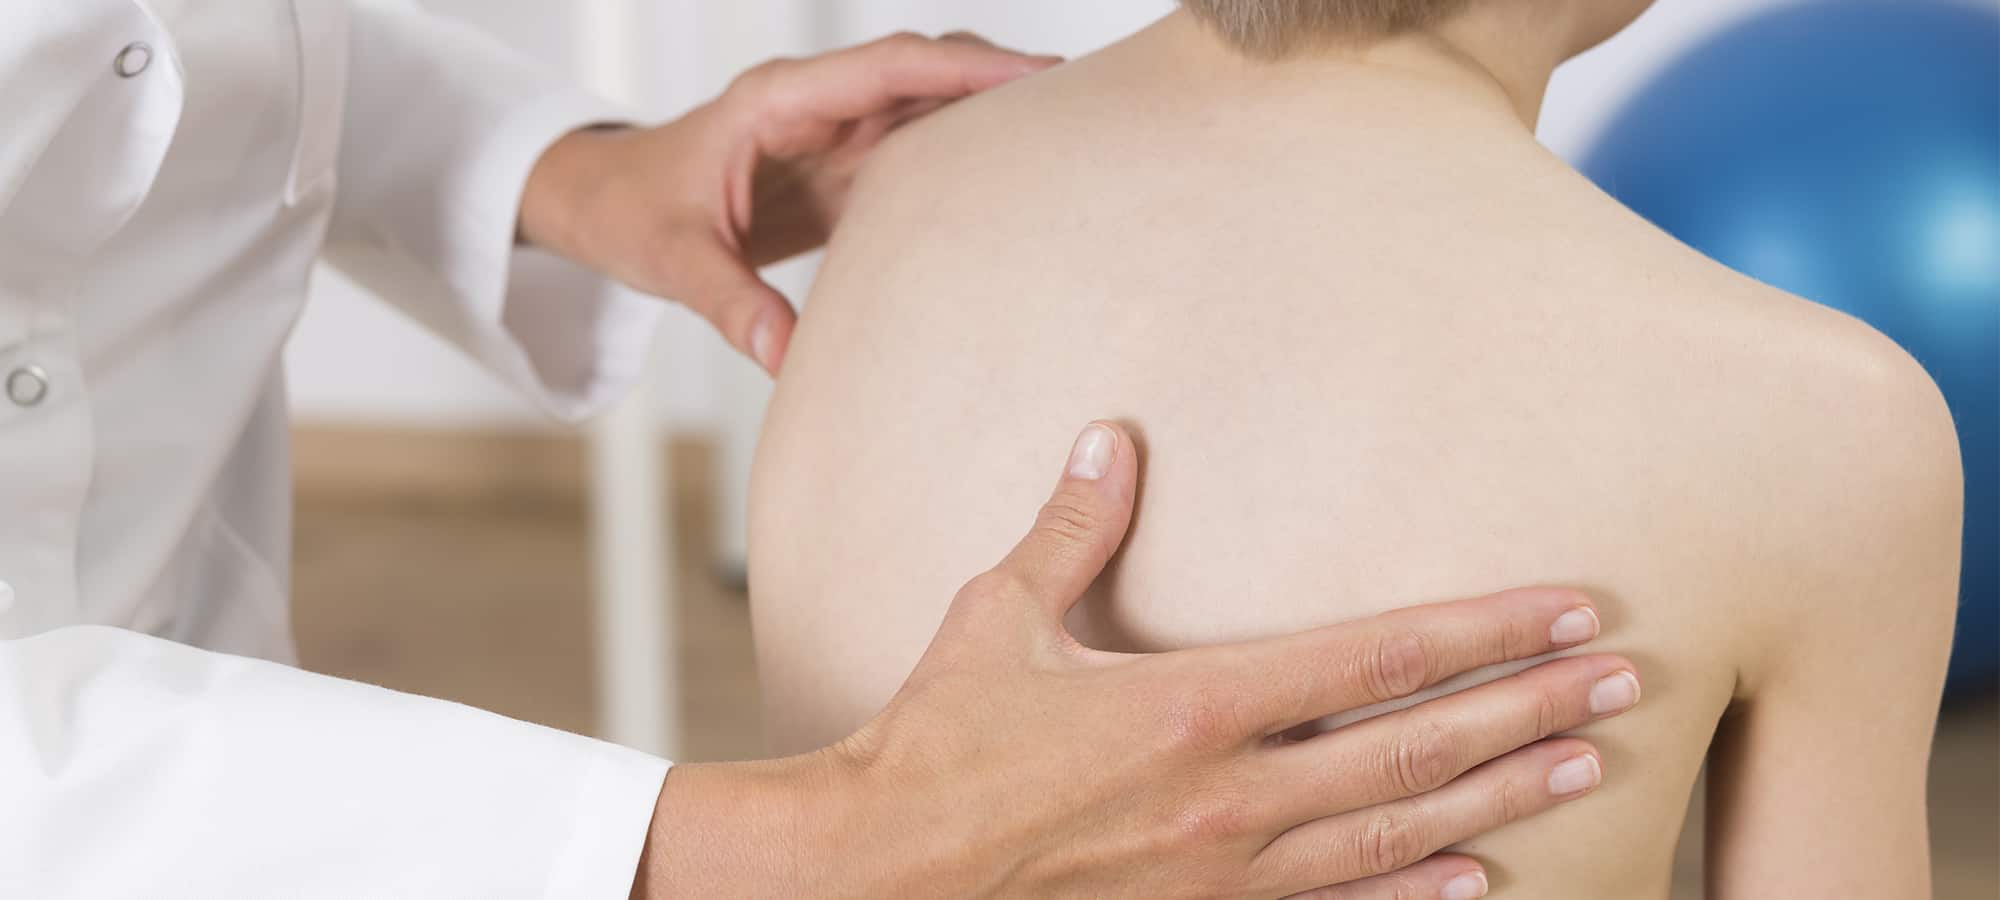 What is Paediatric Physiotherapy?